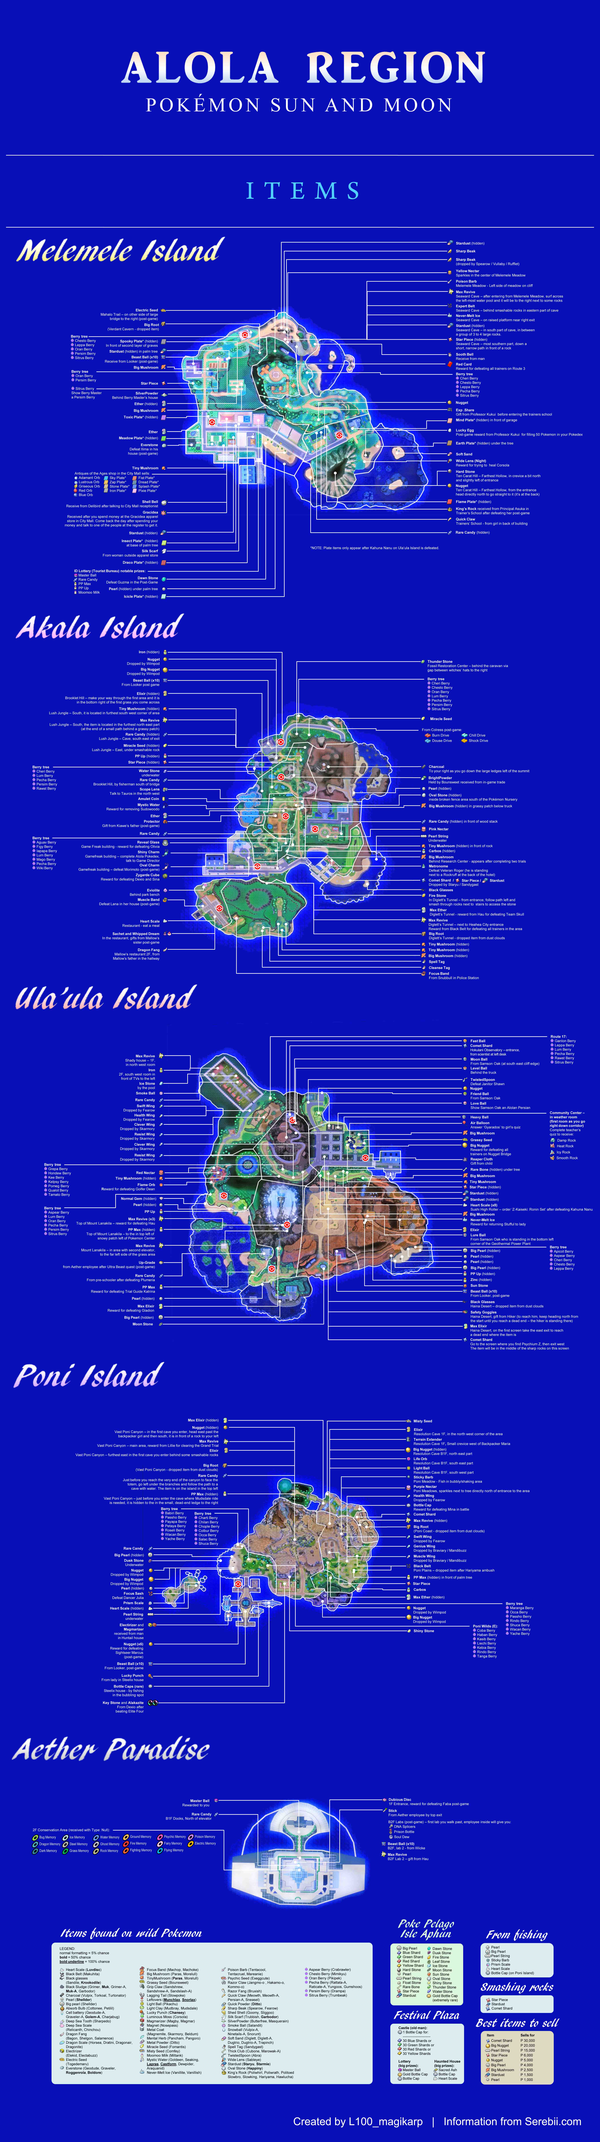 ./20161223-2259-cet-pokemon-sun-and-pokemon-moon-map-guide-2.png